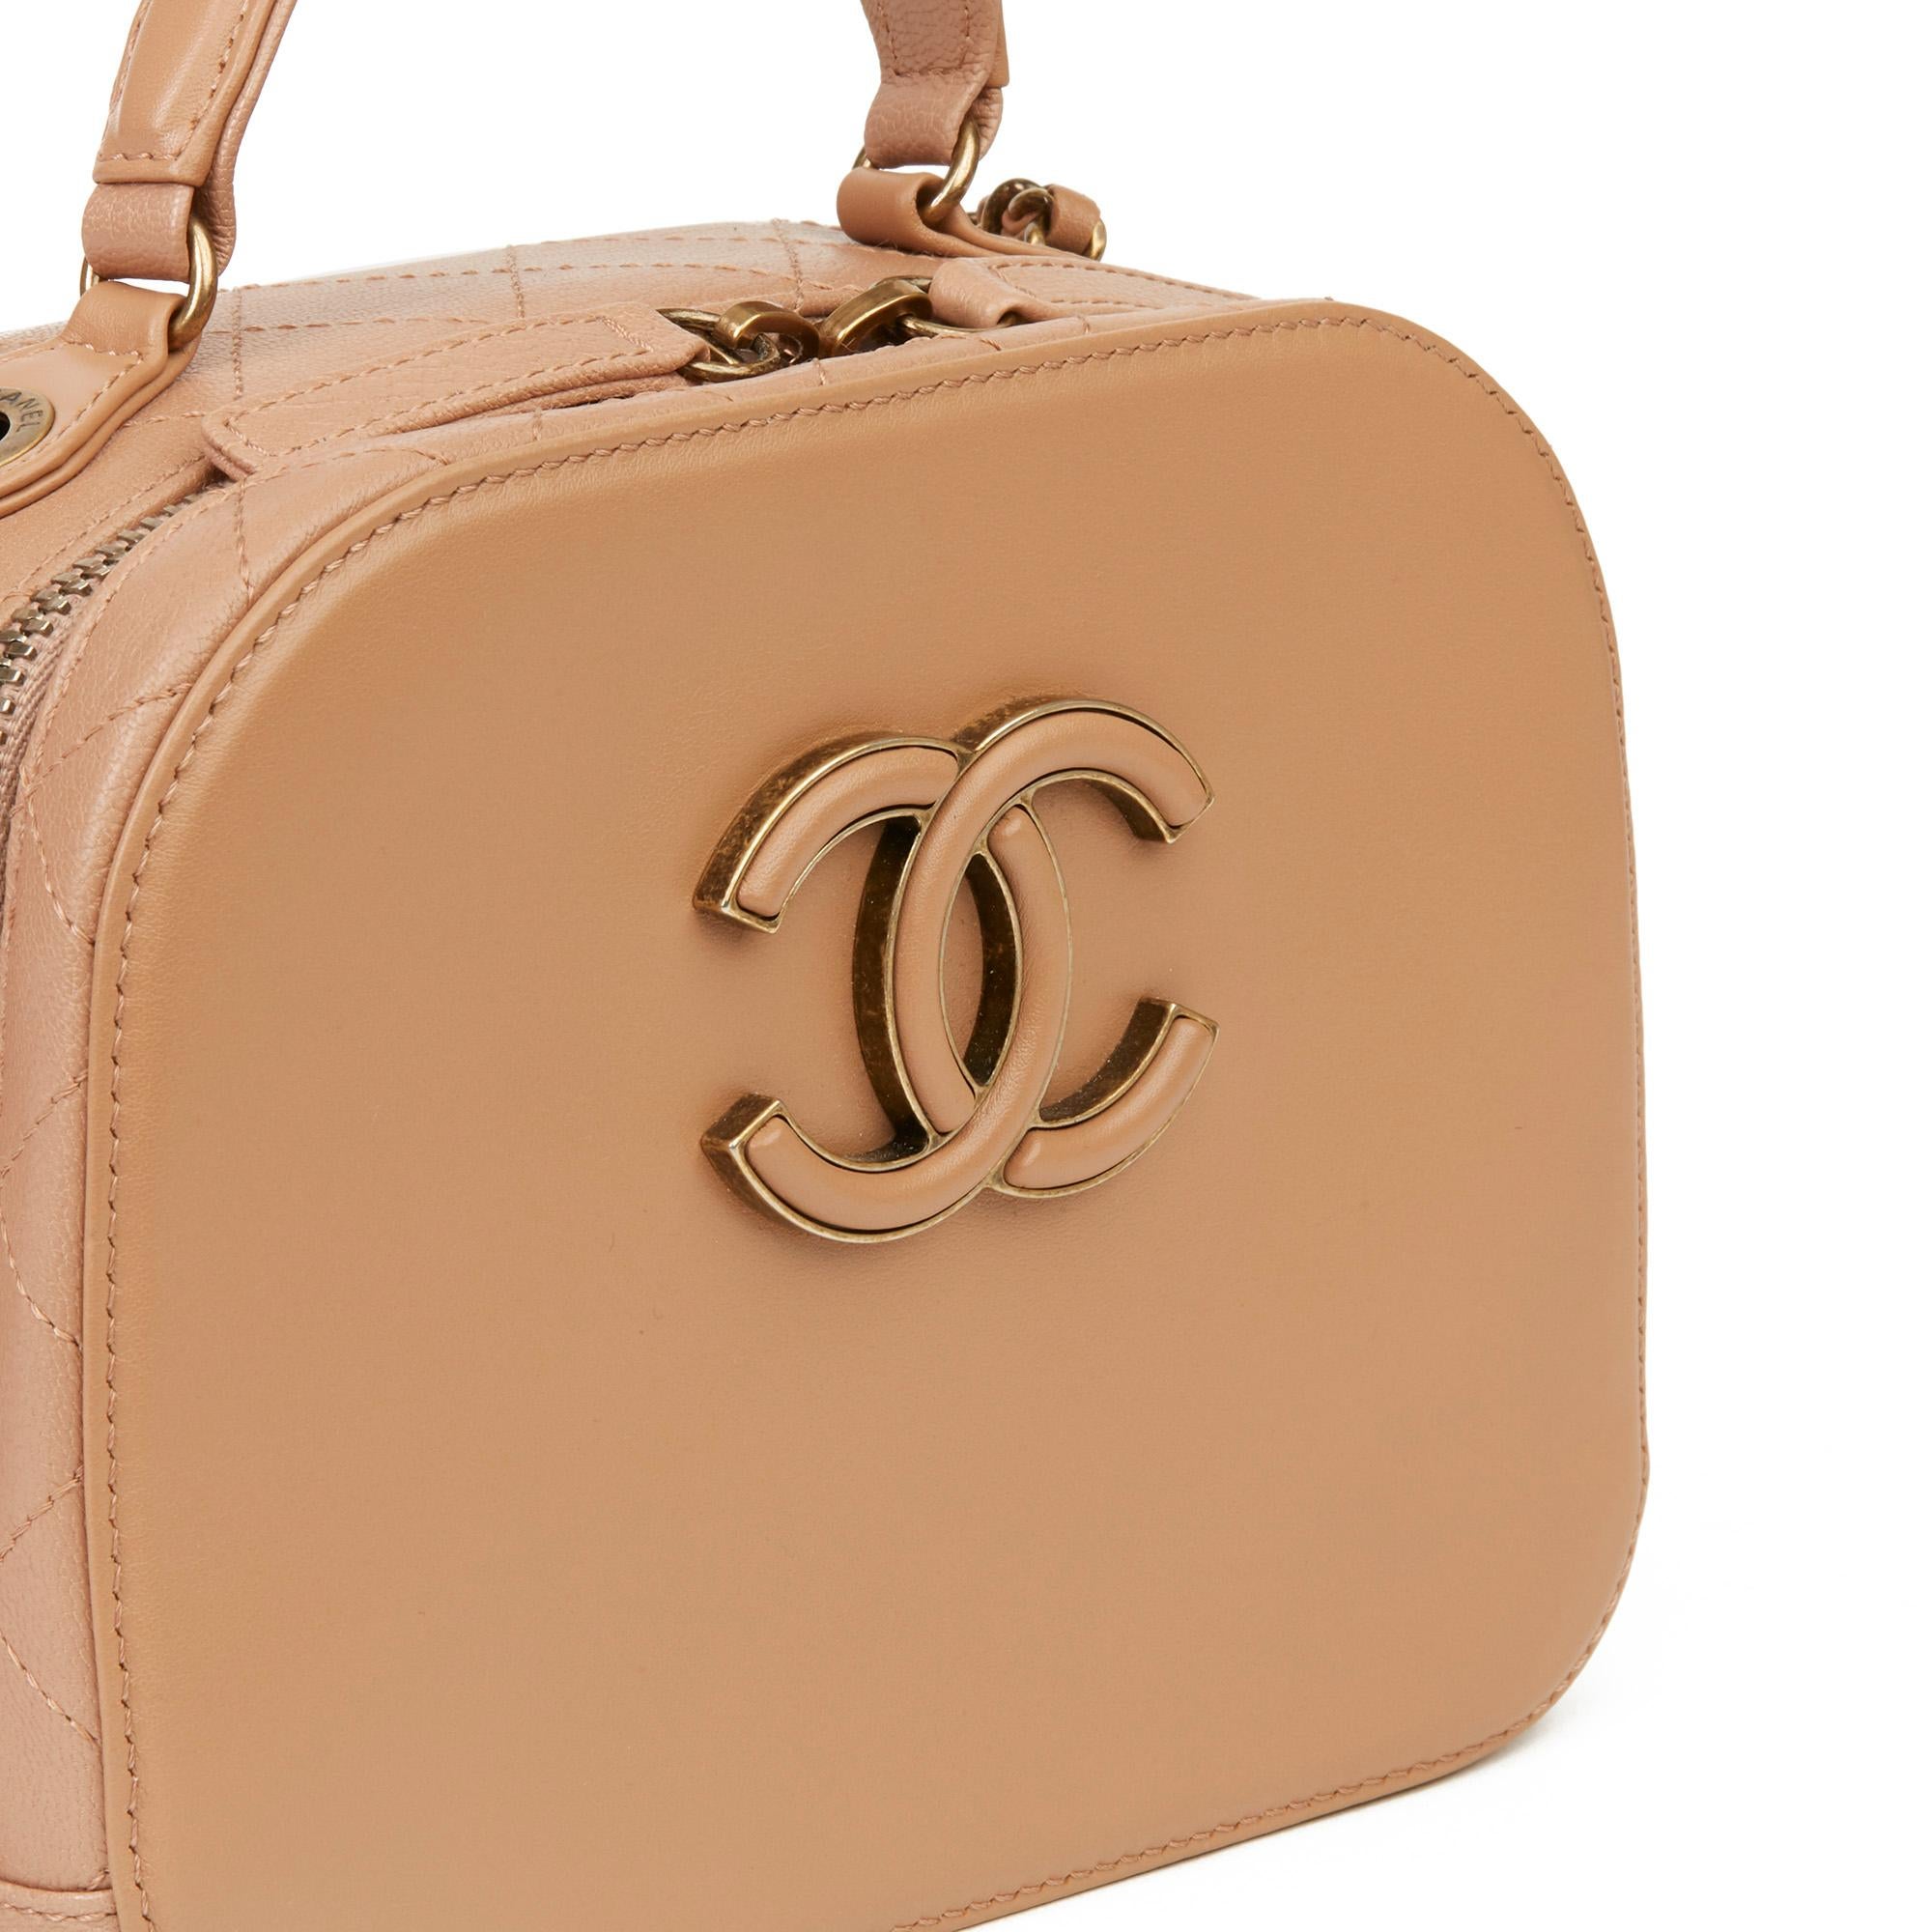 Women's or Men's 2017 Chanel Warm Beige Lambskin & Quilted Goatskin Small Coco Curve Vanity Bag 